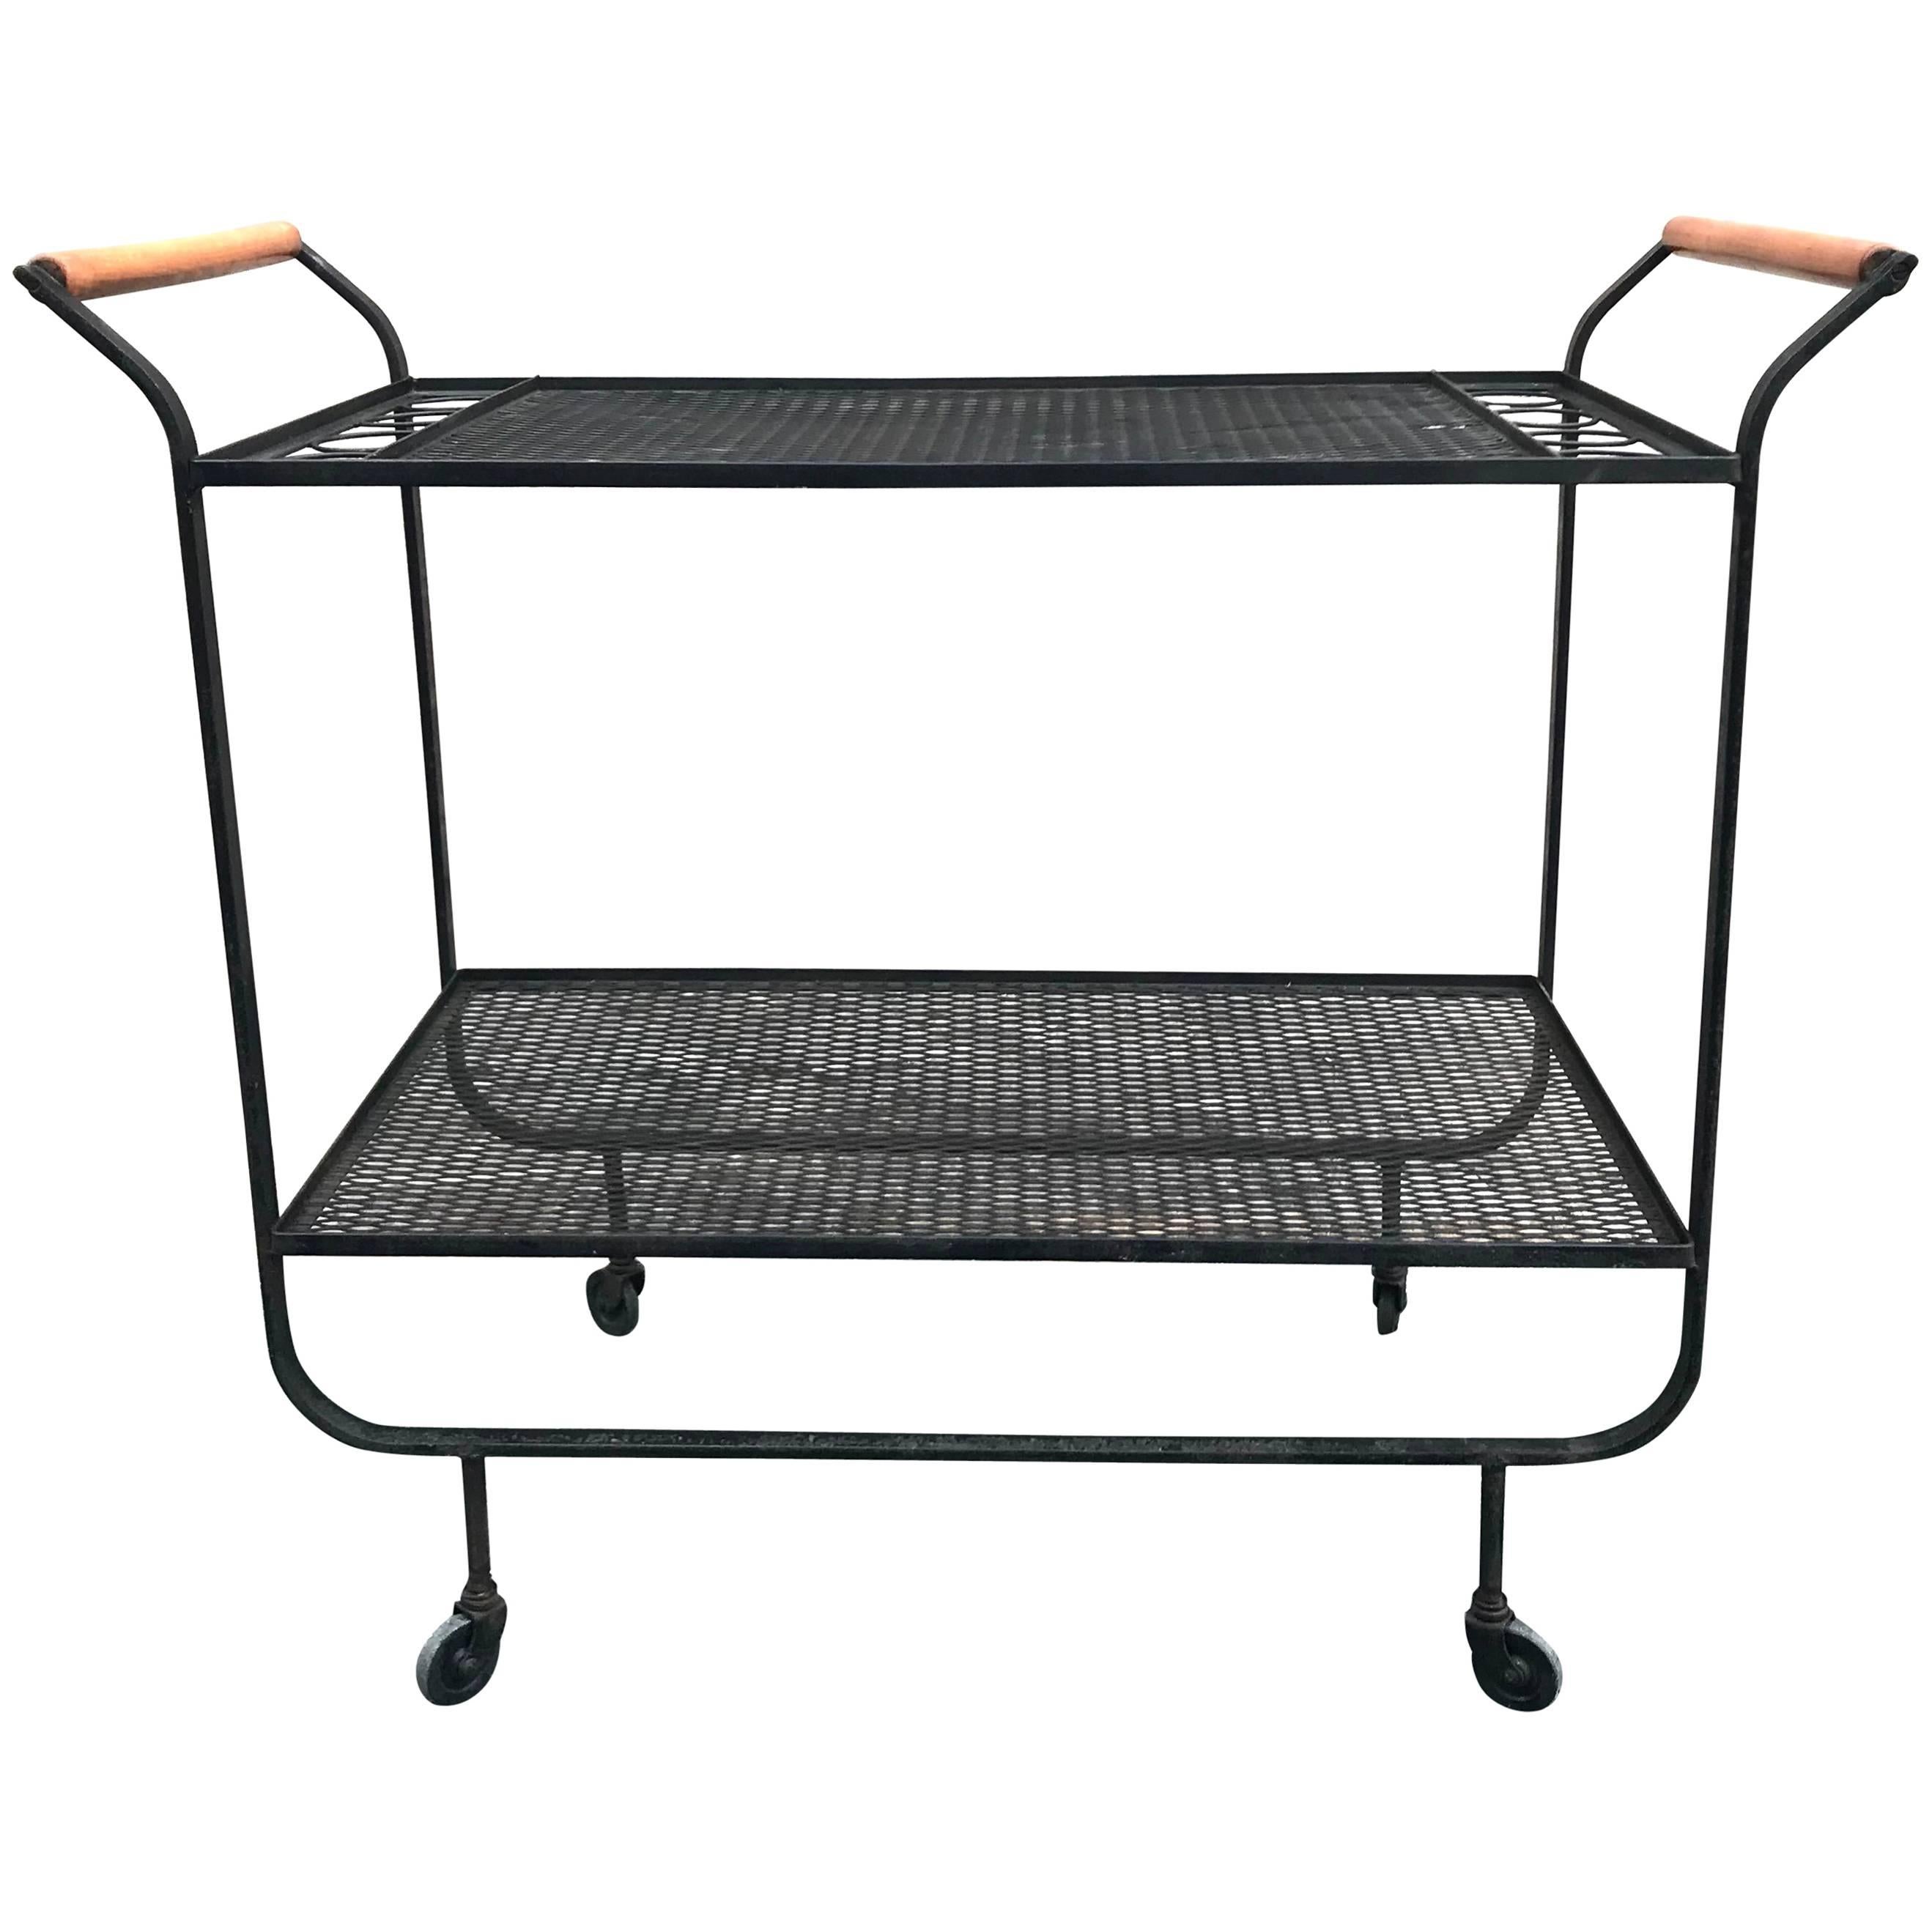 Rare, 1950s Modernist Frederick Weinberg Wrought Iron Bar Cart For Sale